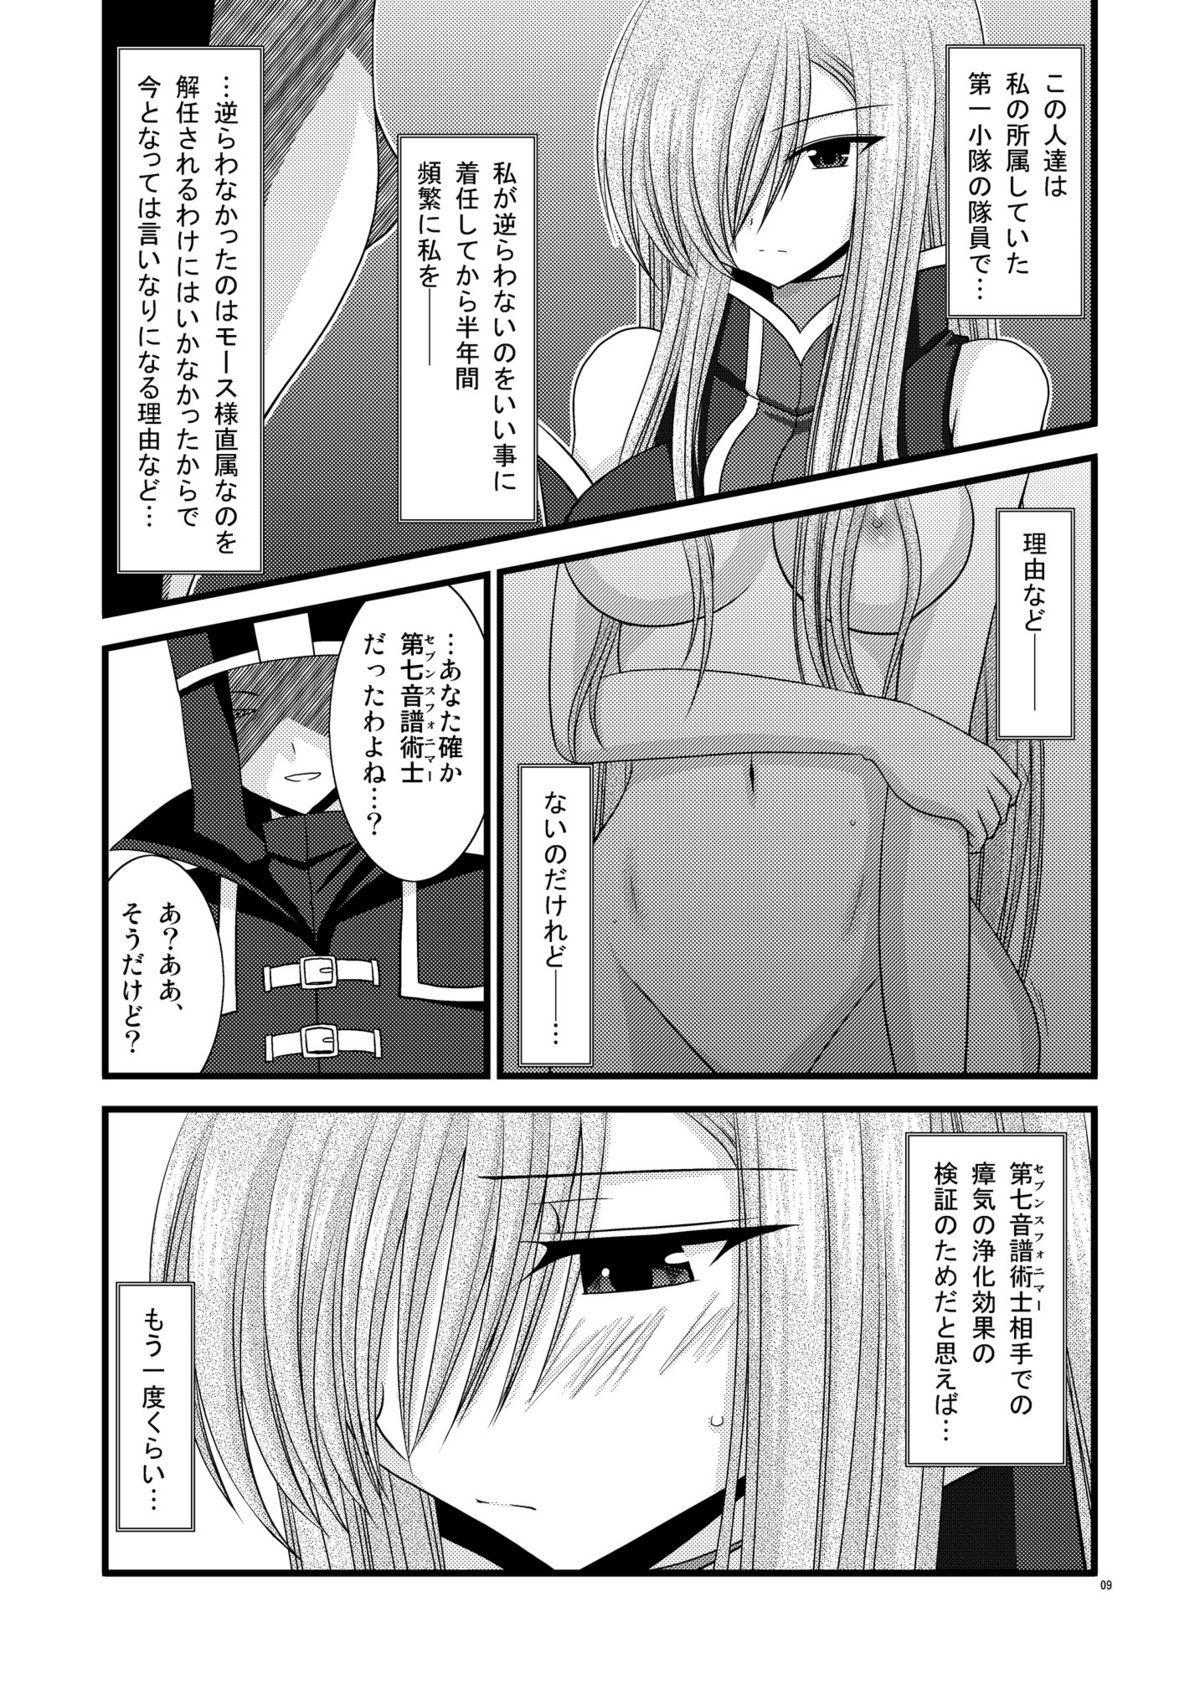 Trans Melon Ni Kubittake! 4 - Tales of the abyss Nylons - Page 8